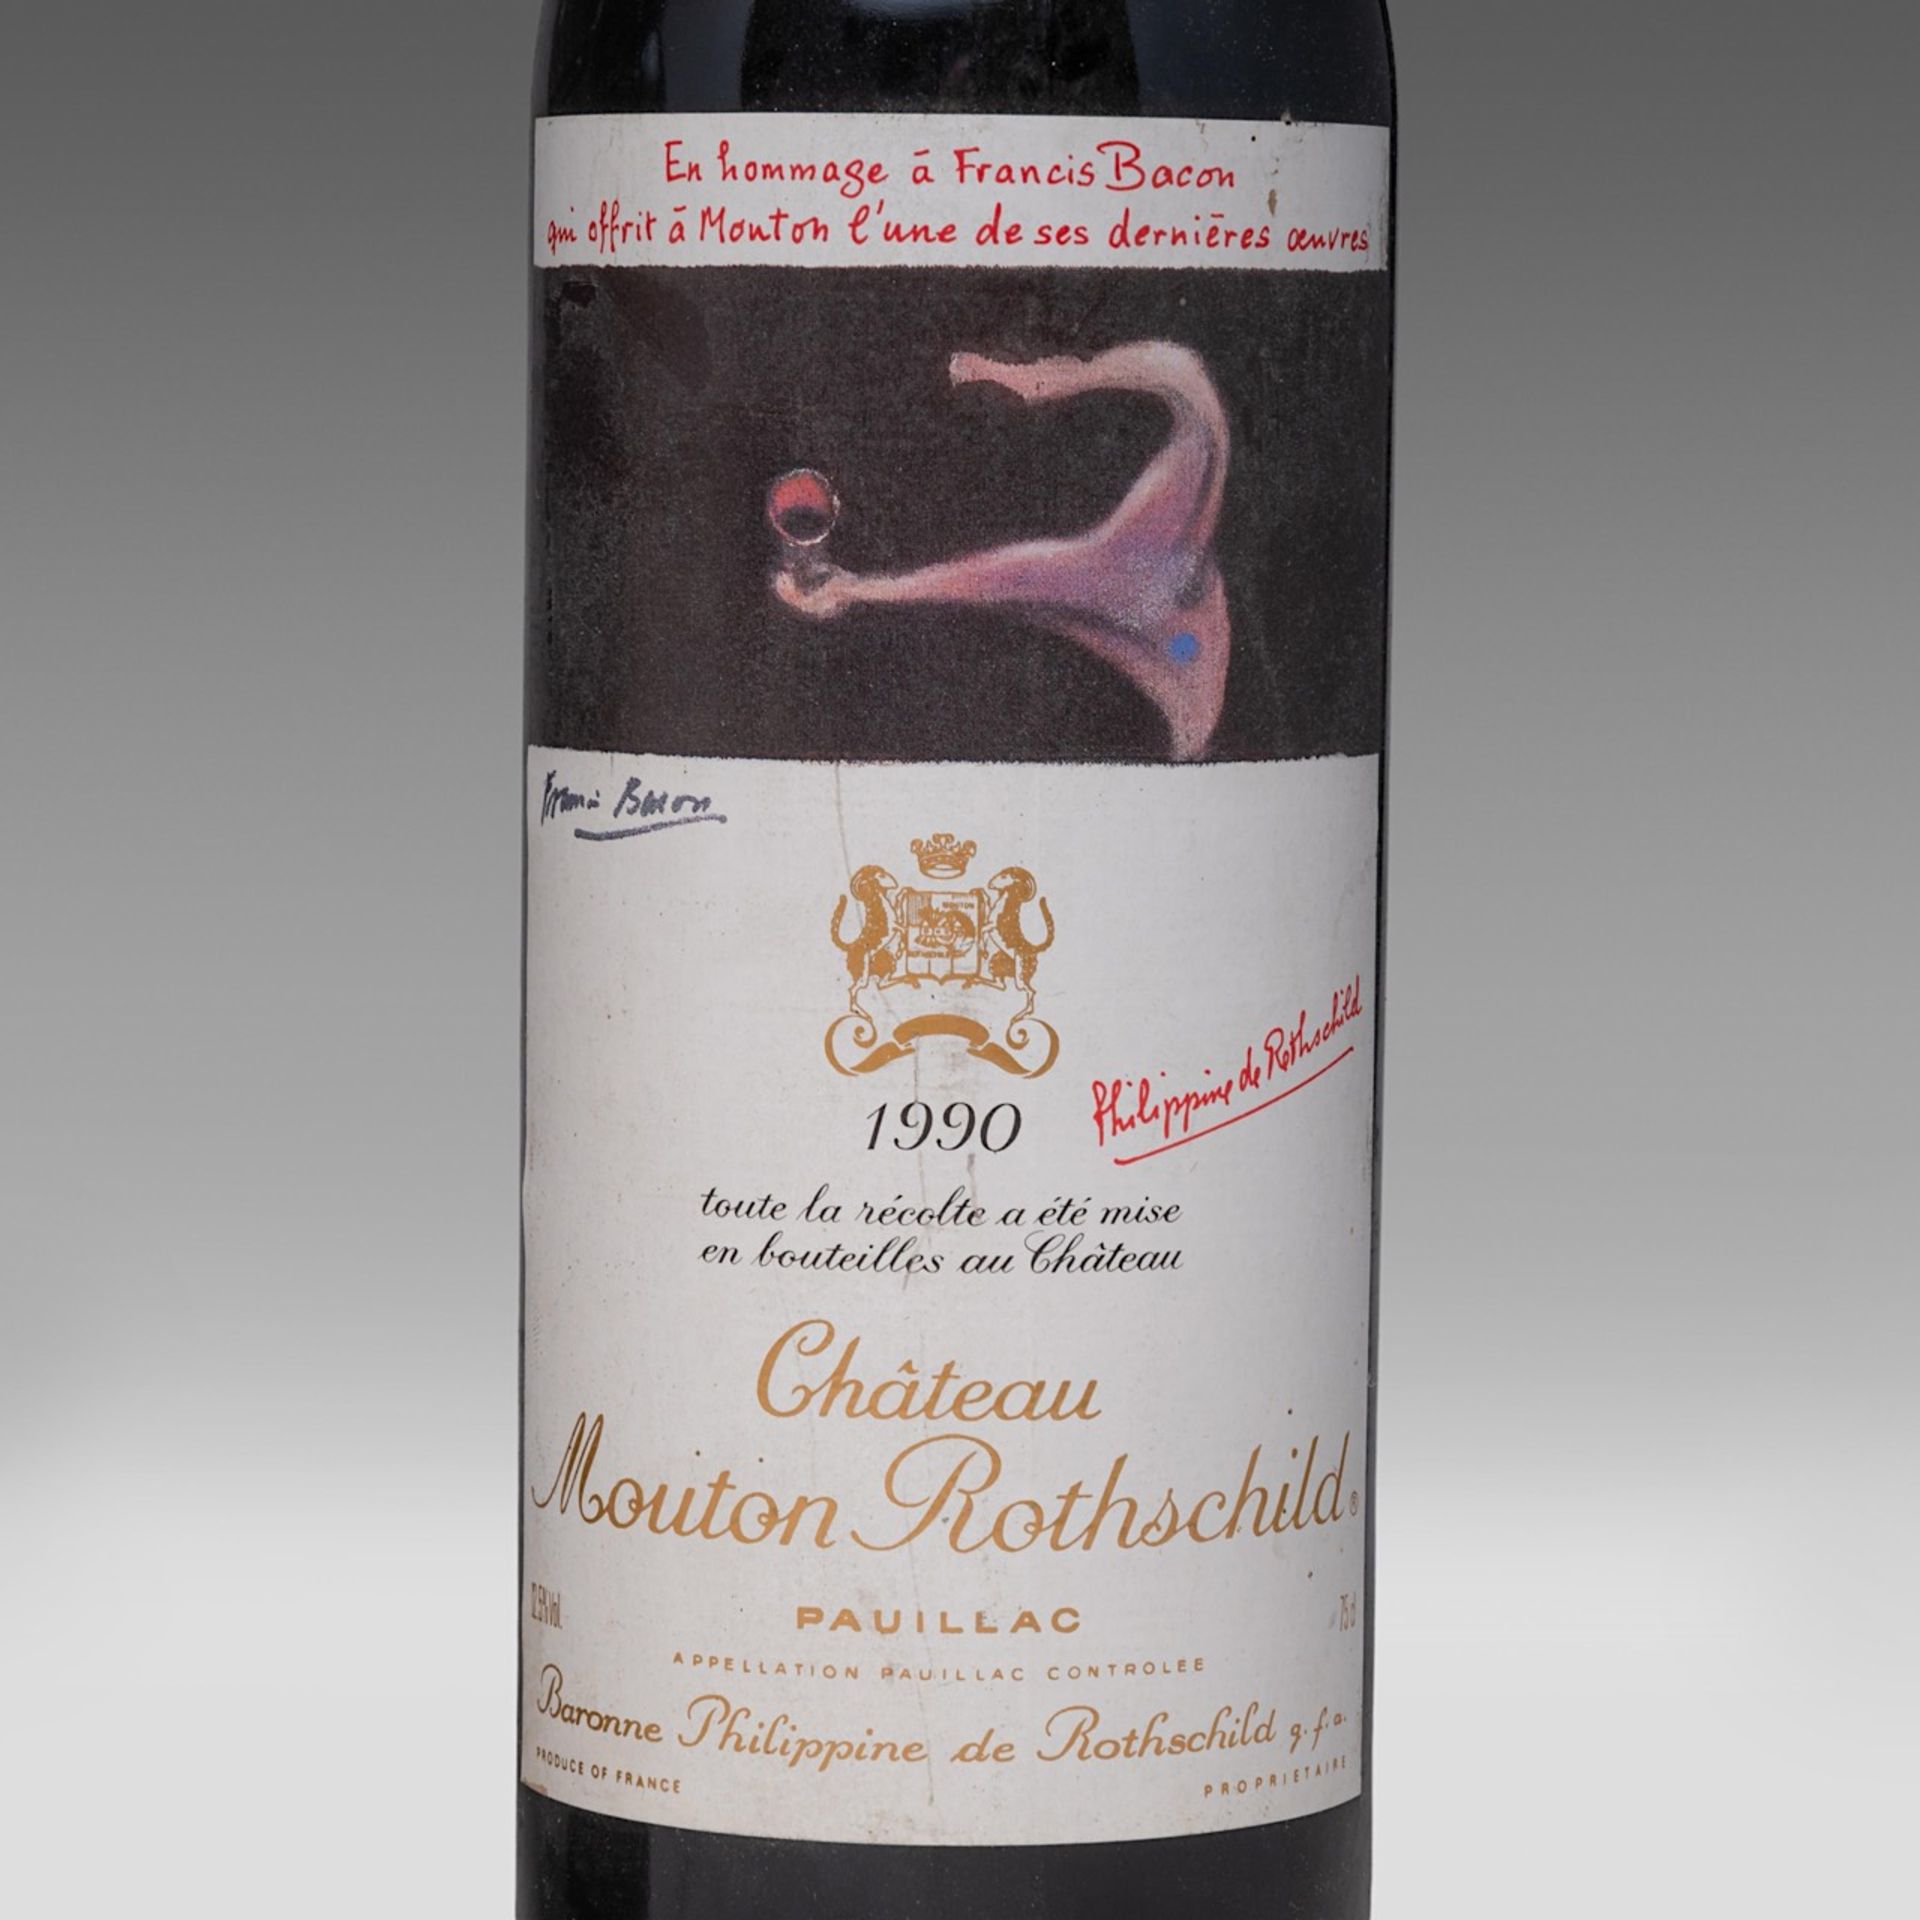 Two bottles 1968 Chateau Mouton Rothschild and a 1990 Chateau Mouton Rothschild - Image 2 of 5